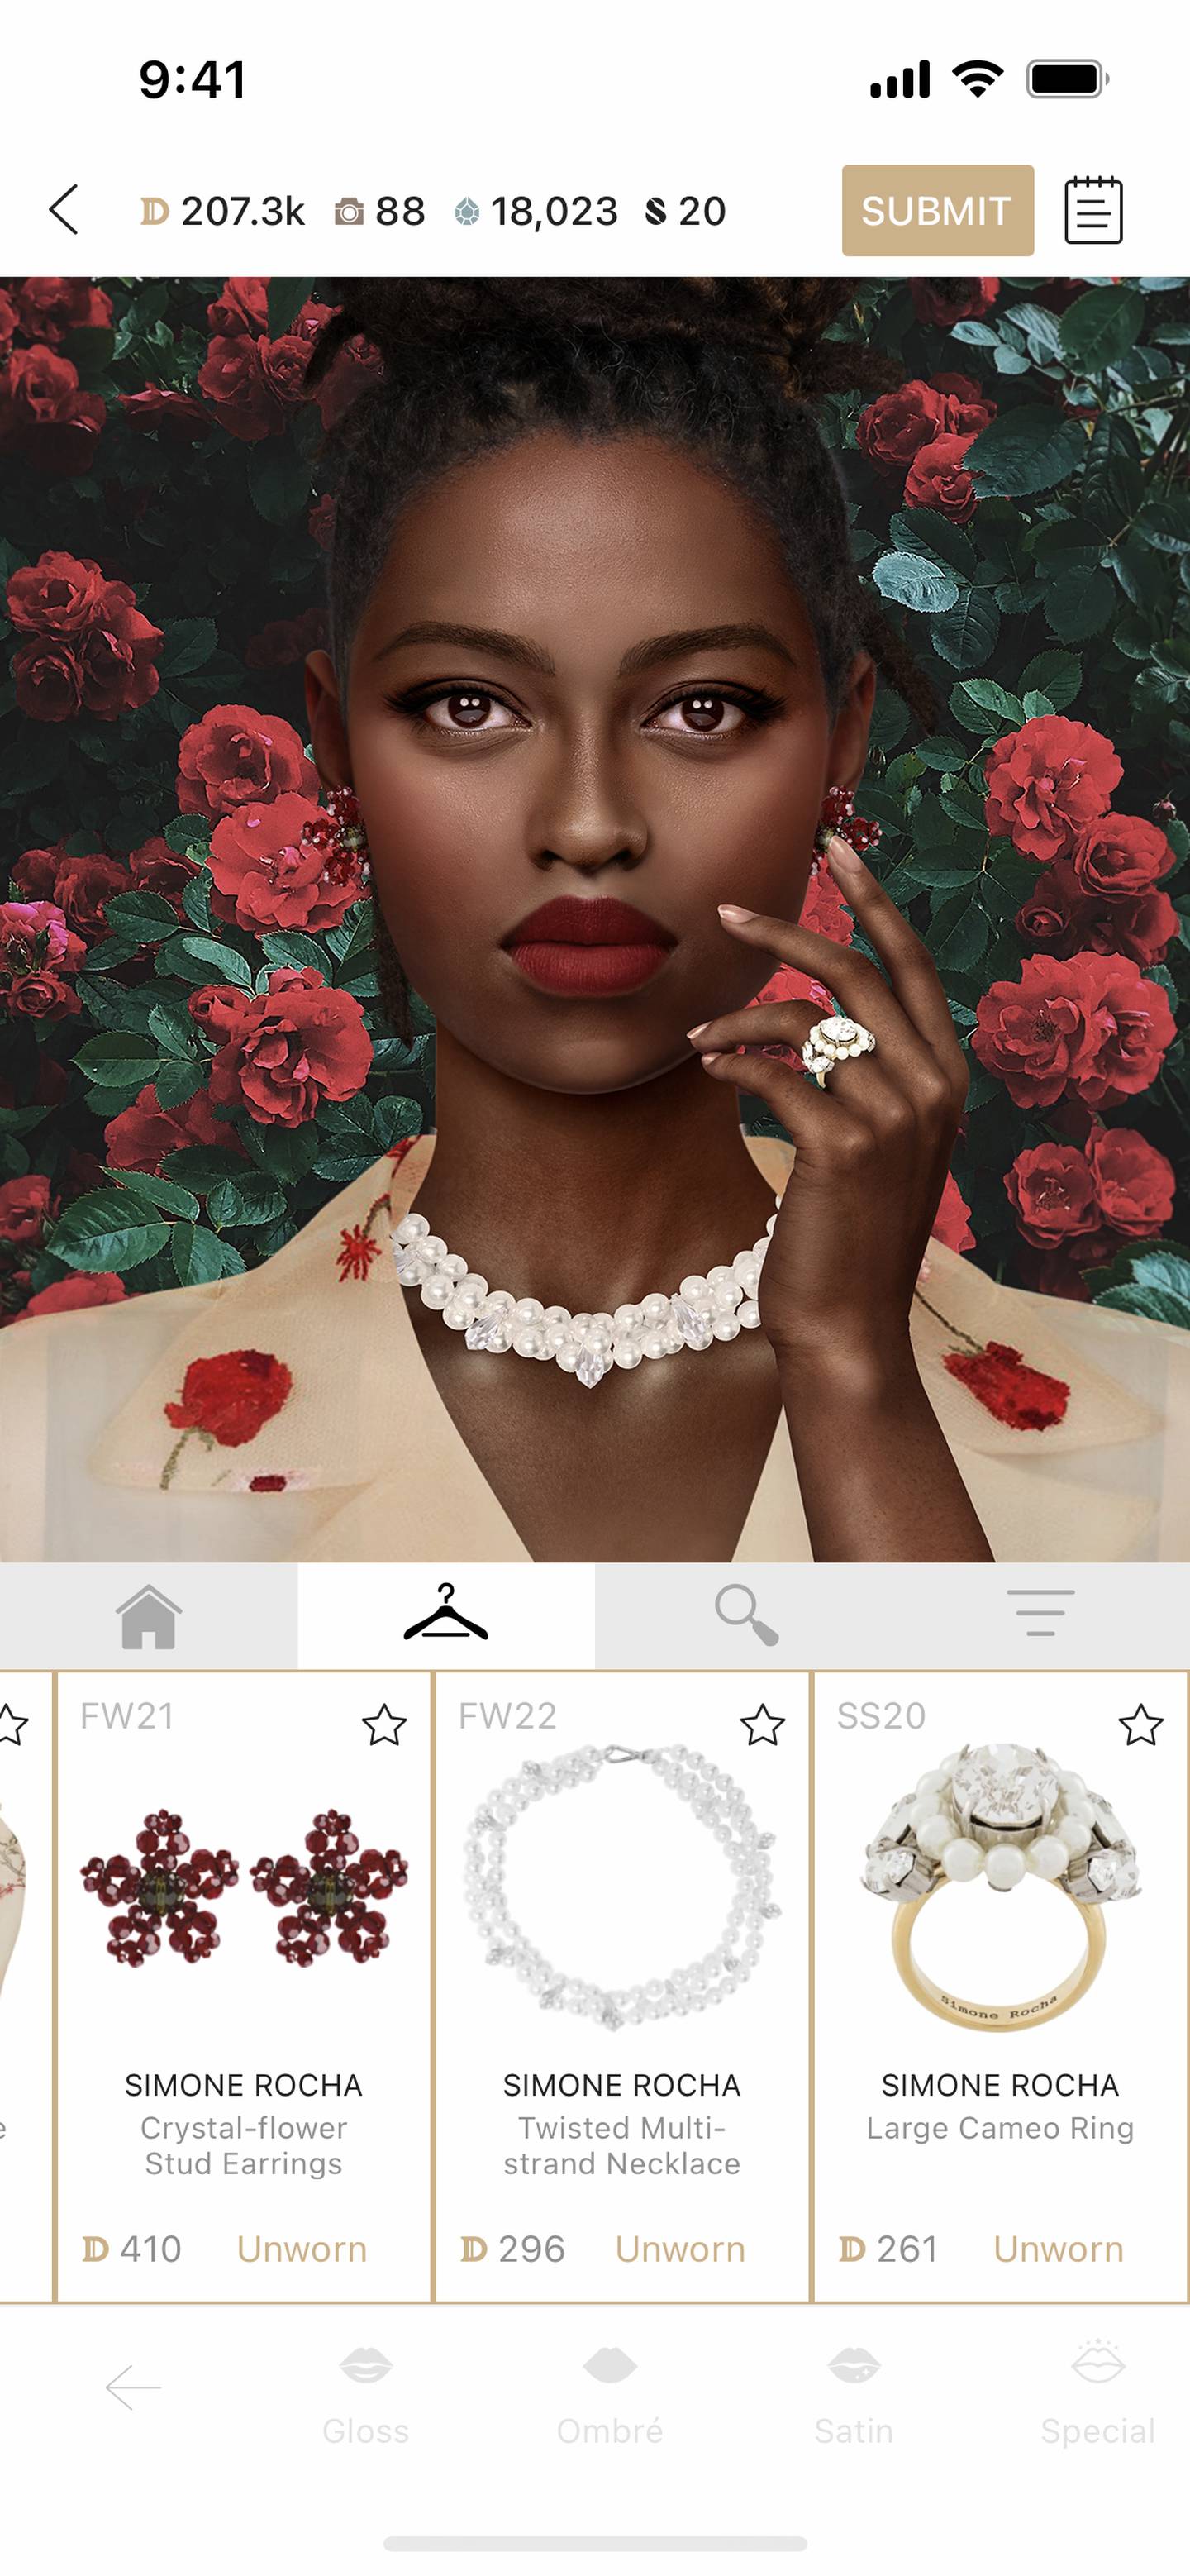 A screenshot from the game shows a digital model wearing a Simone Rocha necklace, earrings, and ring.